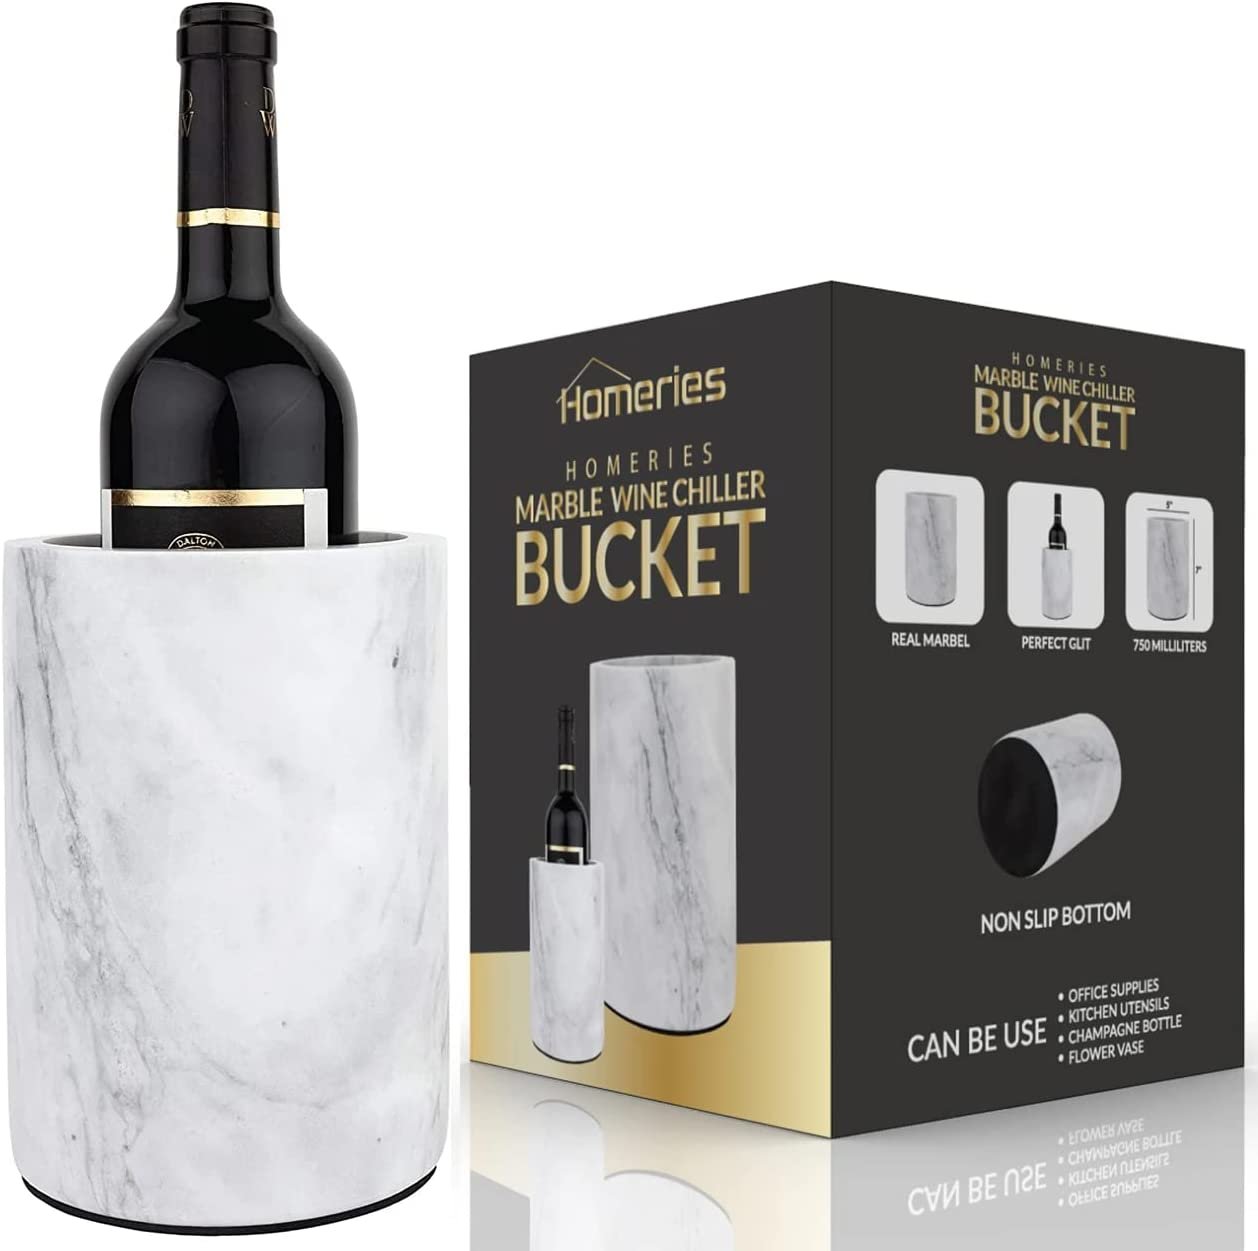 Homeries Marble Wine Chiller Bucket - Wine & Champagne Cooler for Parties, Dinner – Keep Wine & Beverages Cold – Holds Any 750ml Bottle - Ideal Gift for Wine Enthusiasts